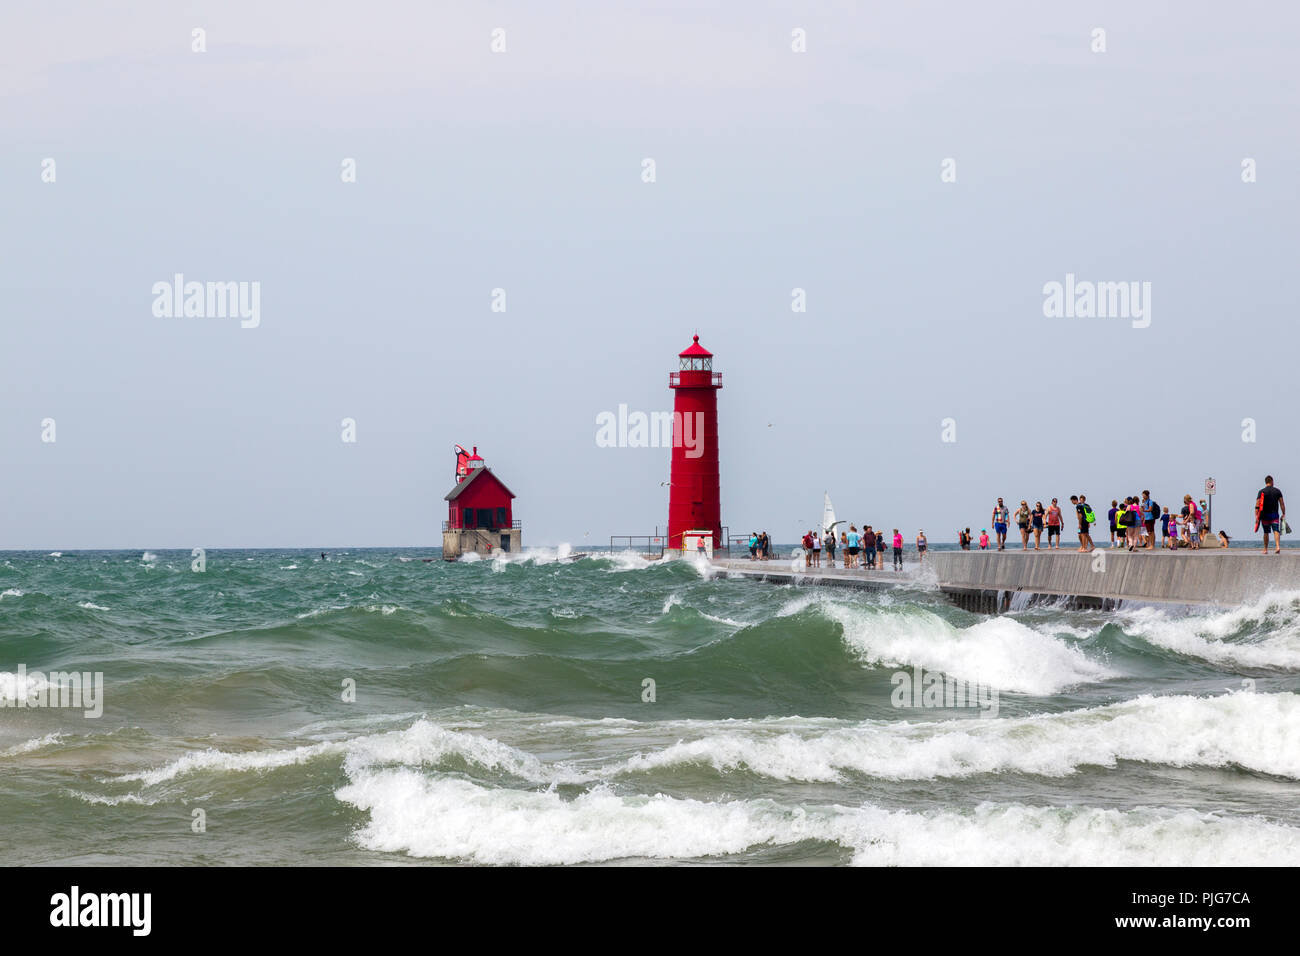 Tourists on a pier in south Haven Michigan on a day of rough waves on Lake Michigan. Grand Haven lighthouse. Stock Photo